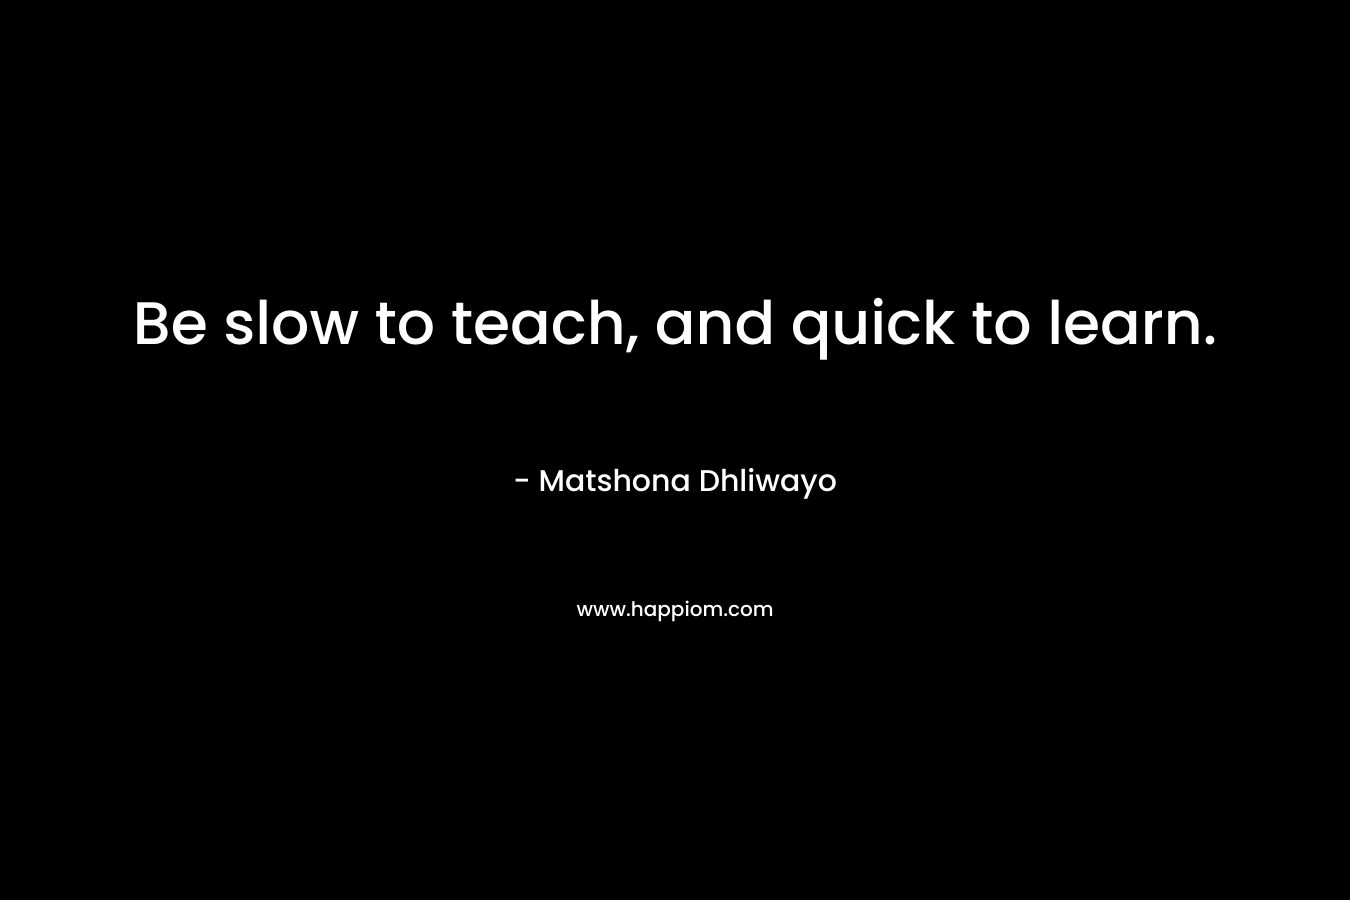 Be slow to teach, and quick to learn. – Matshona Dhliwayo